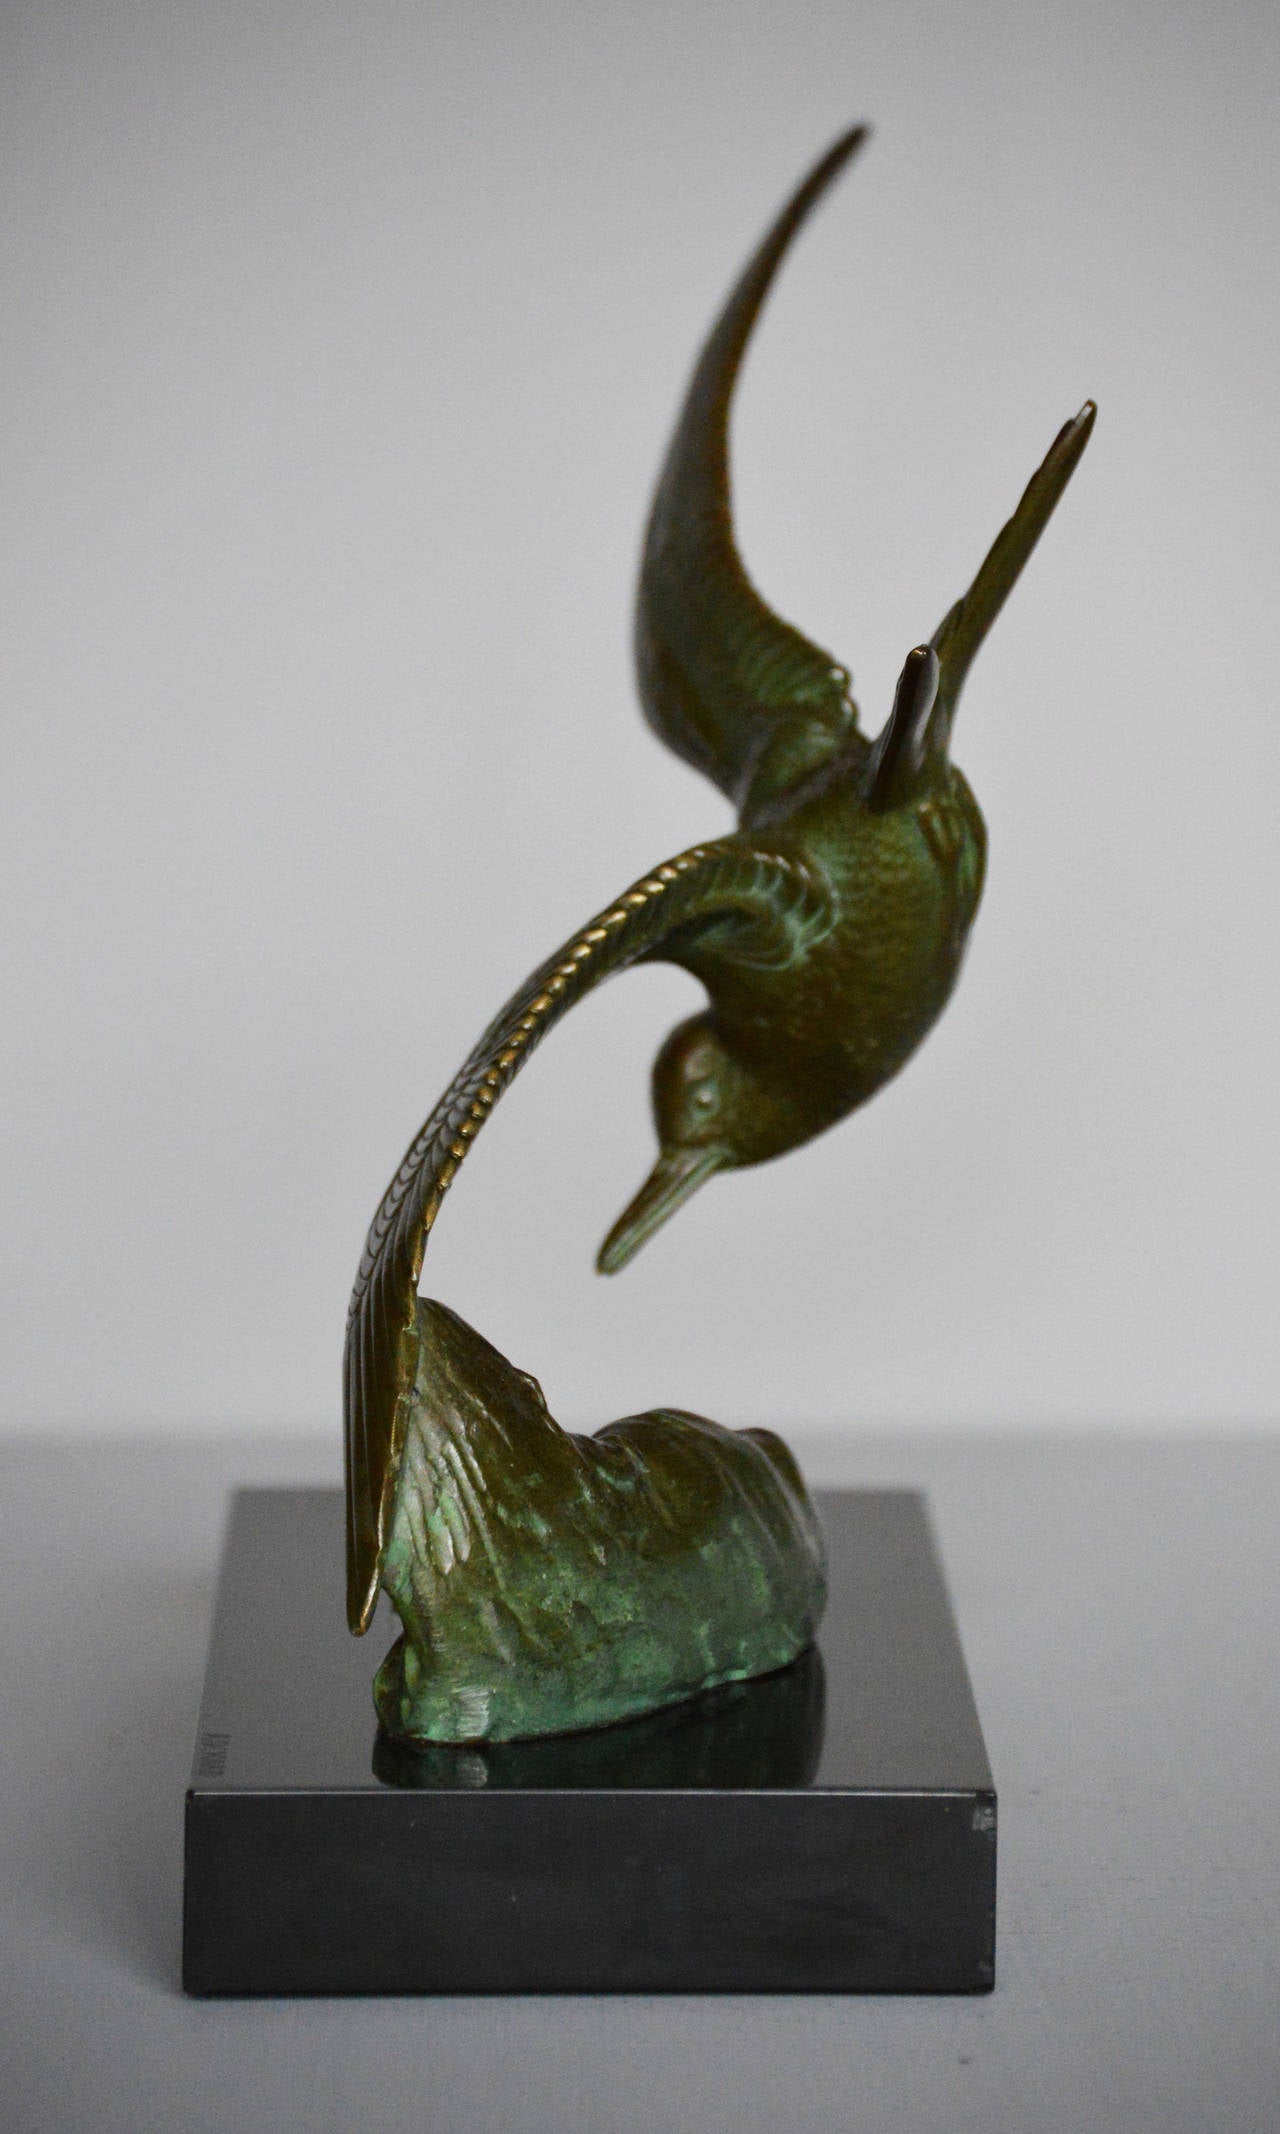 Irenee Rochard
French, (1906-1984)
Signed
Height: 8¾ inches
Width: 8 inches
Depth: 4 inches

A beautiful Art Deco bronze sculpture of a tern in flight above waves. The whole is raised on a black marble plinth and is signed to the bronze ‘I